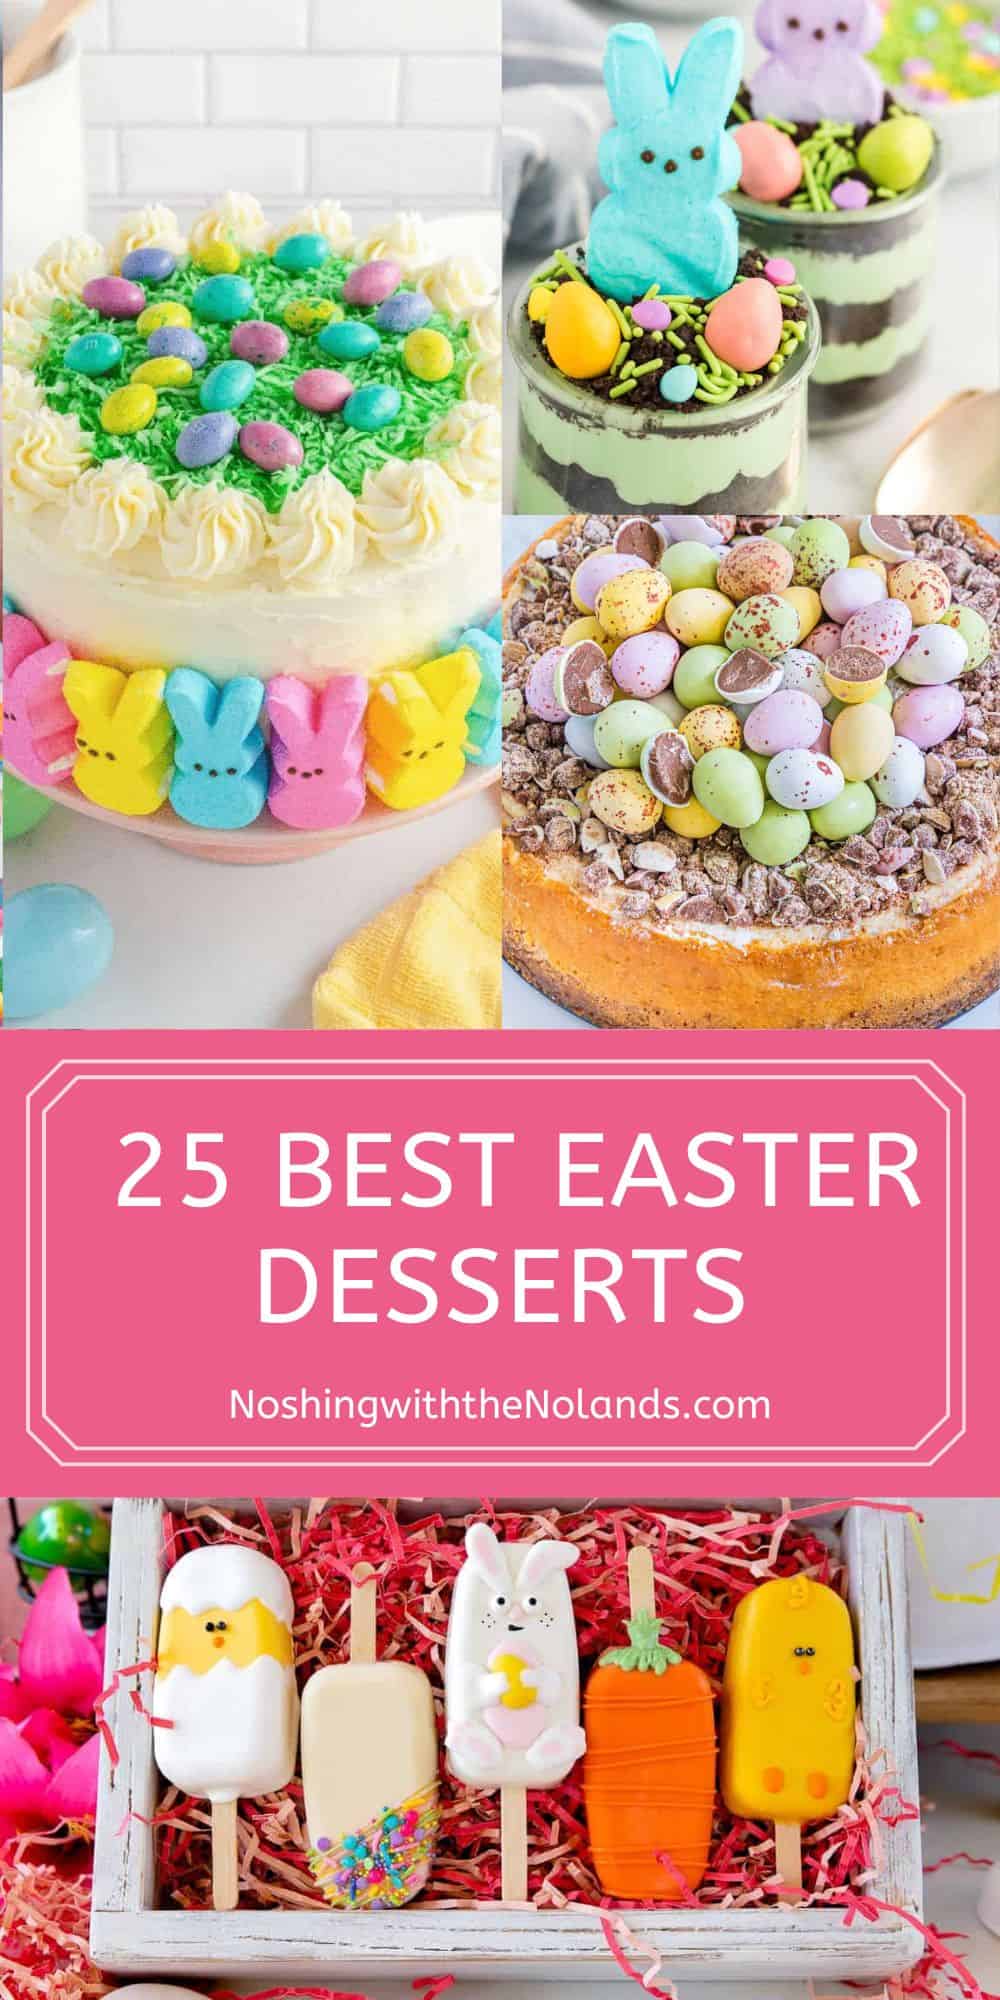 25 Best Easter Desserts - Noshing With The Nolands